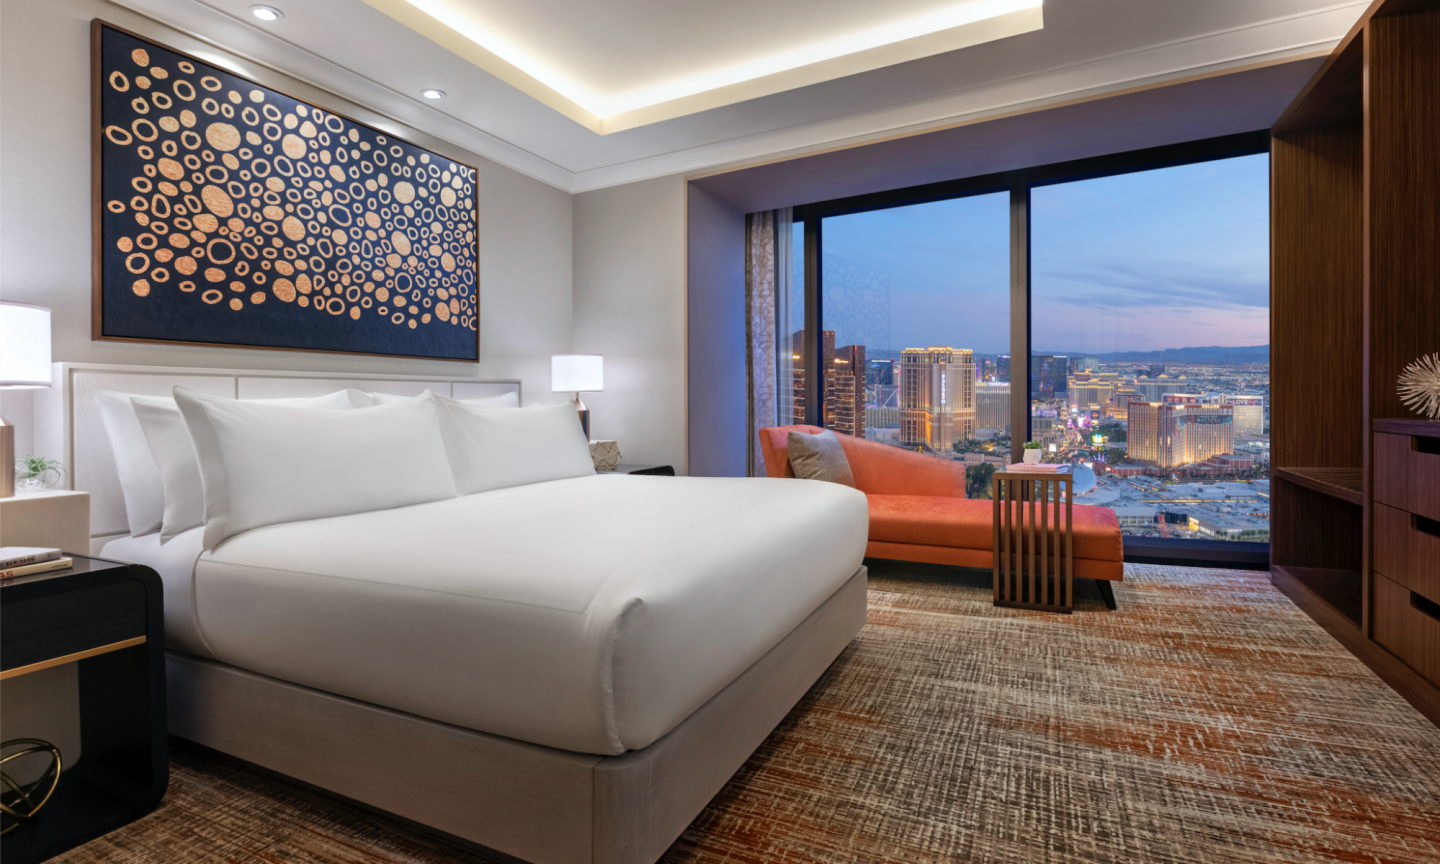 The Newest Las Vegas Hotels You Need to Know About in 2021 - NerdWallet